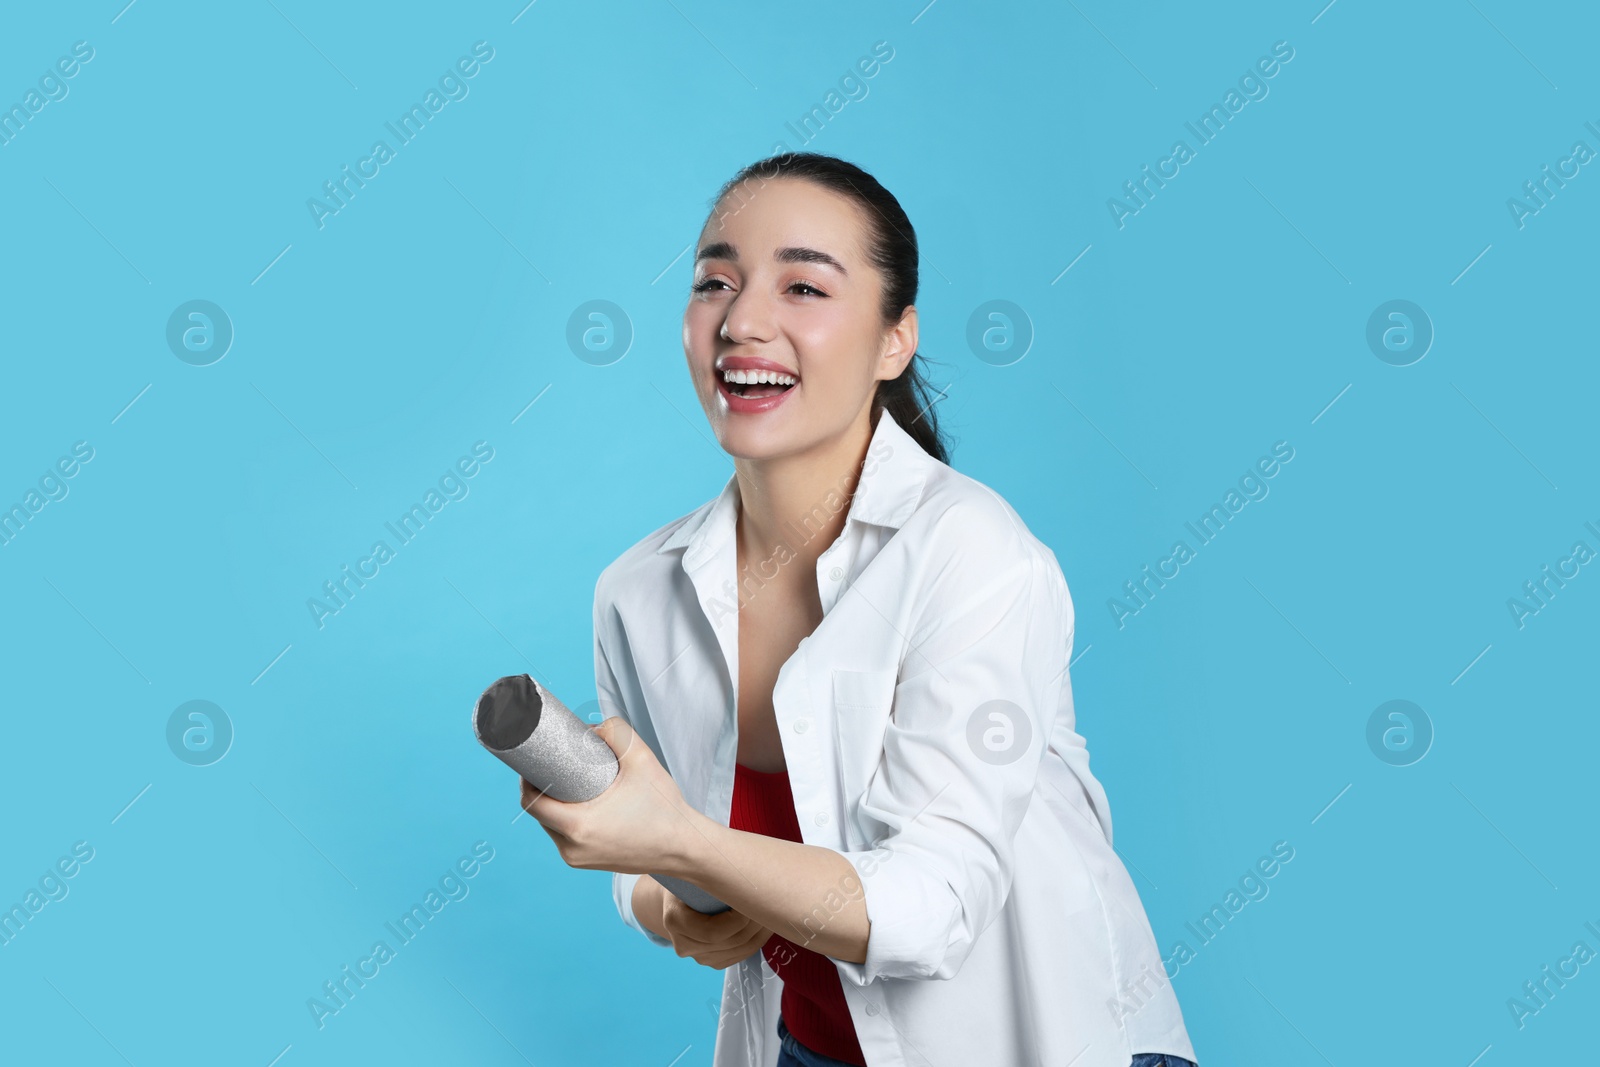 Photo of Young woman blowing up party popper on light blue background